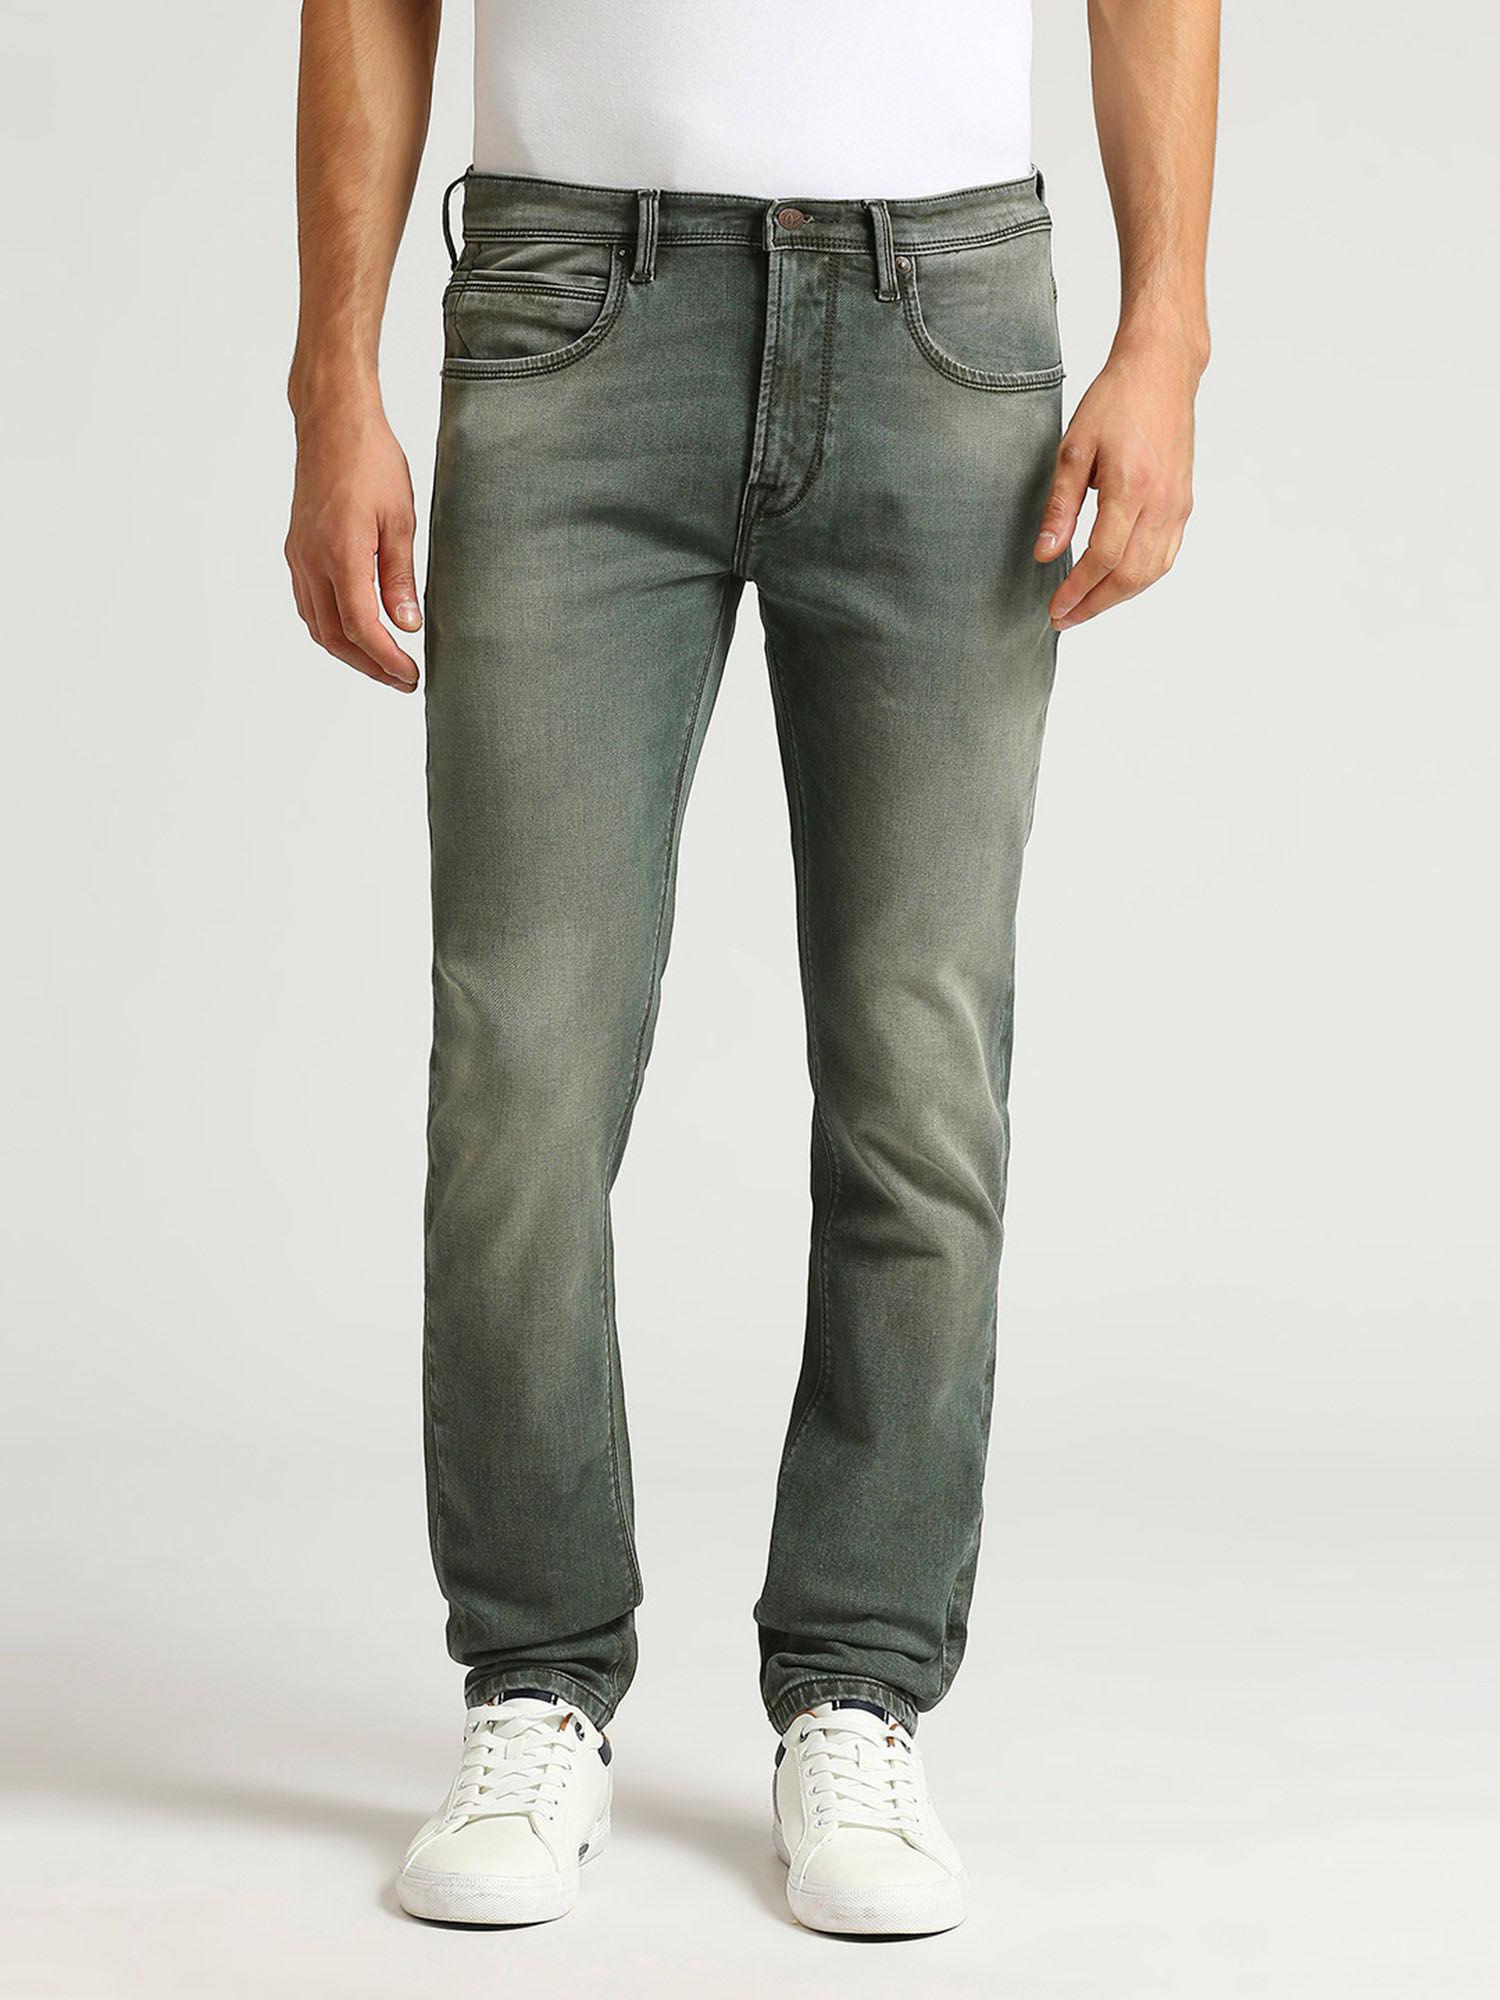 grey-vapour-tapered-fit-low-waist-jeans